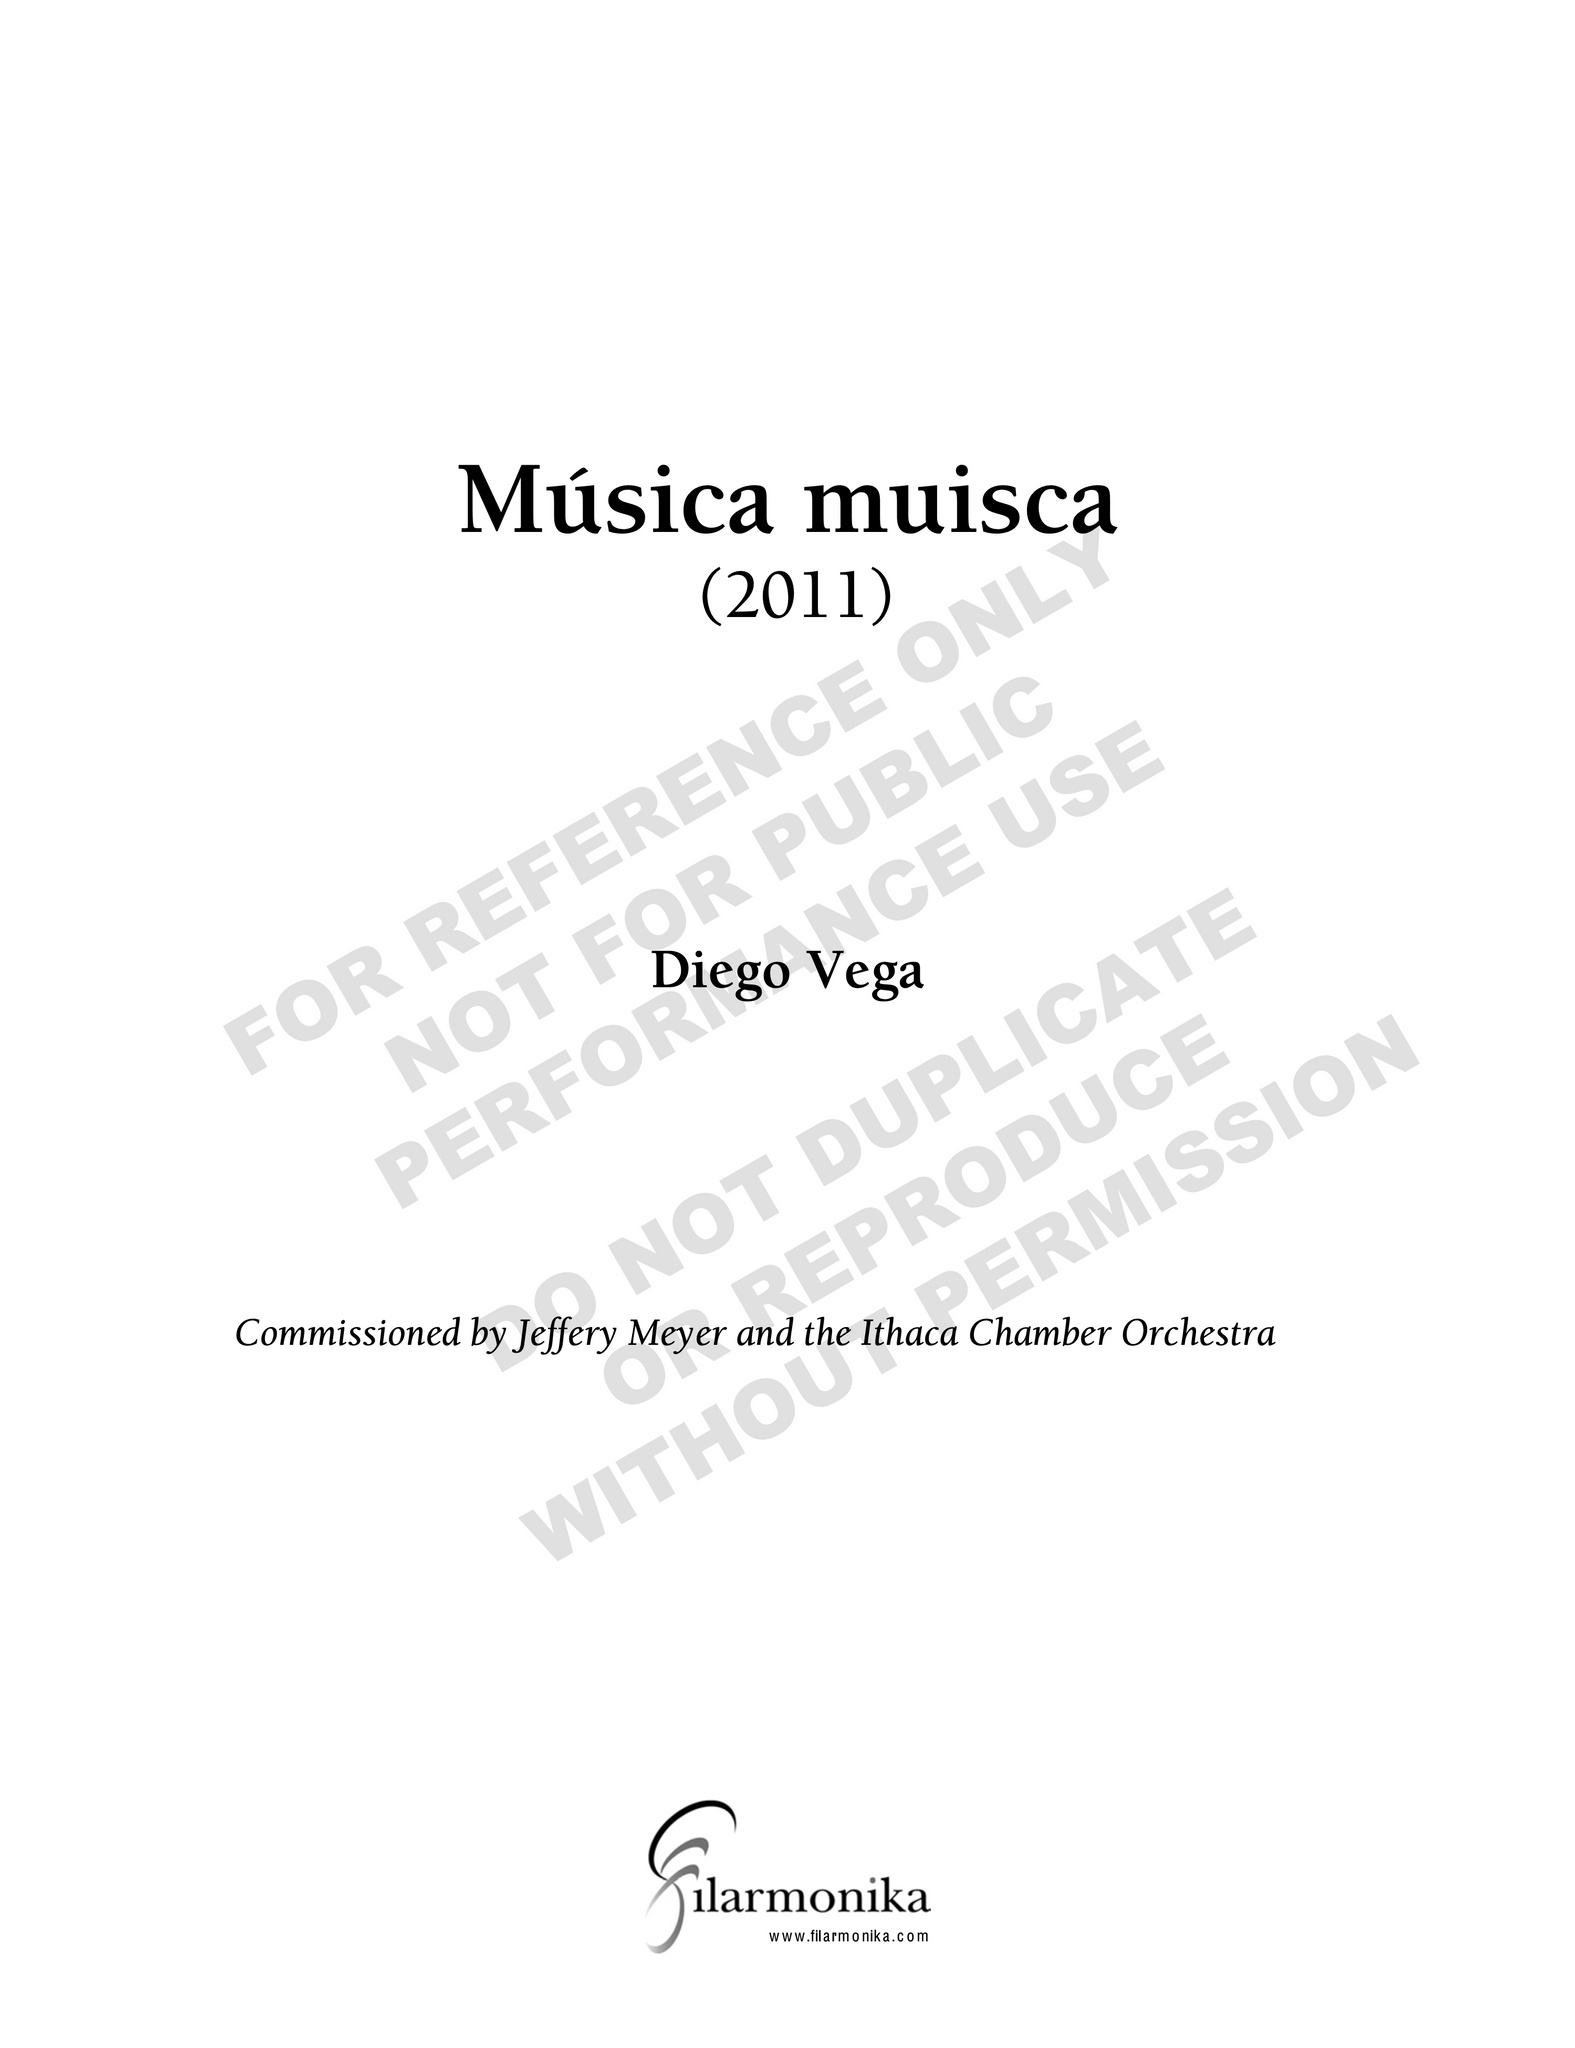 Música muisca, for orchestra